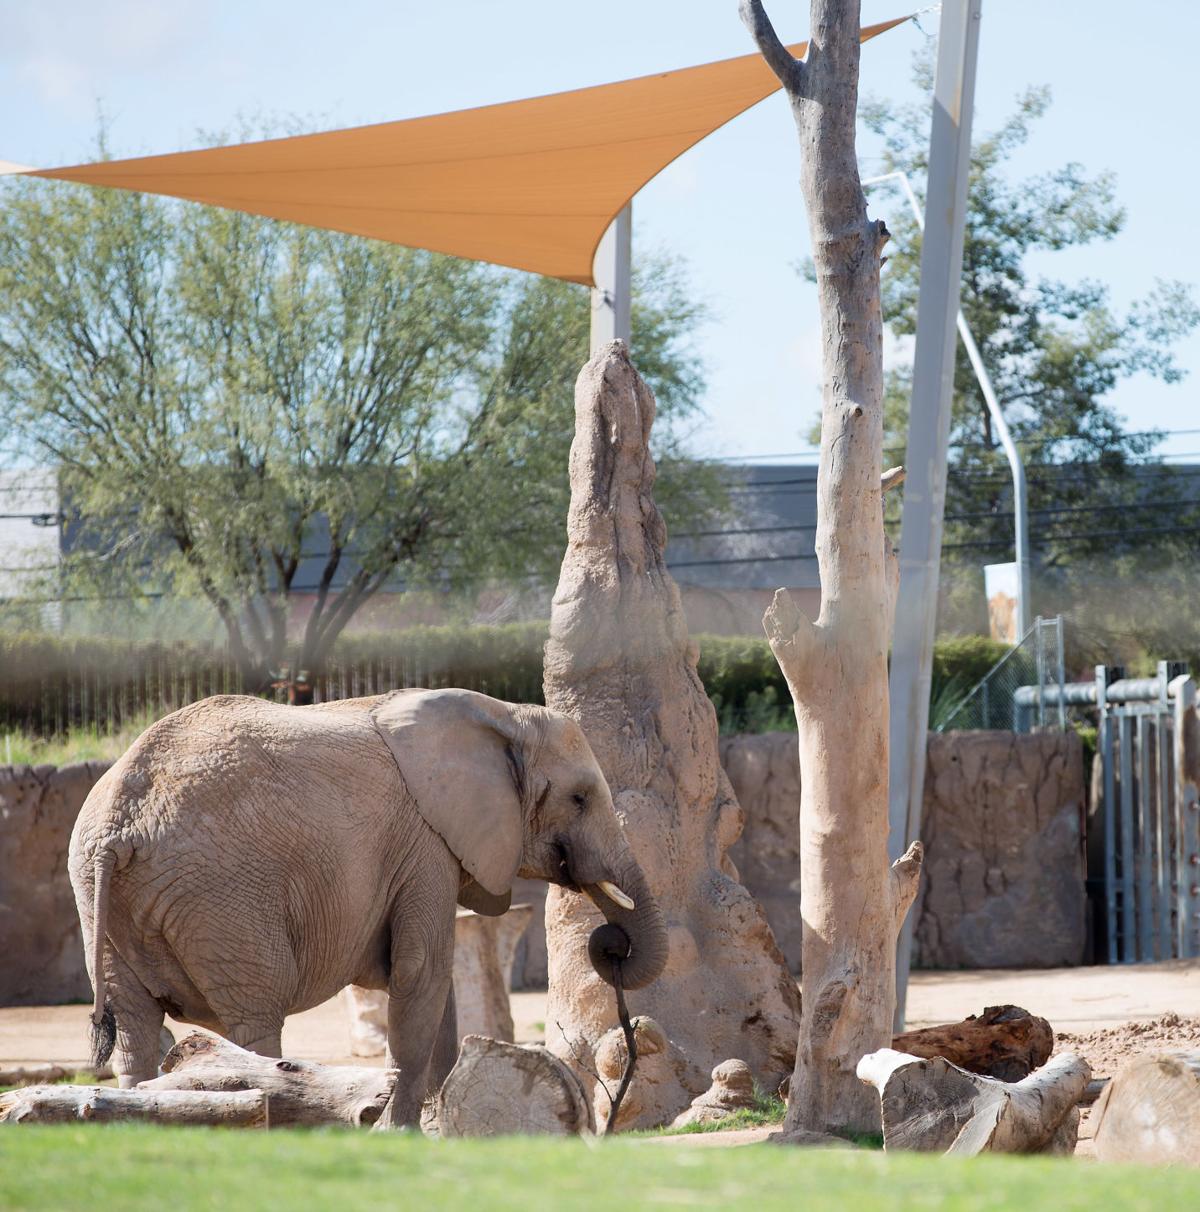 Tucson's baby elephant getting more brave, playing with big sister